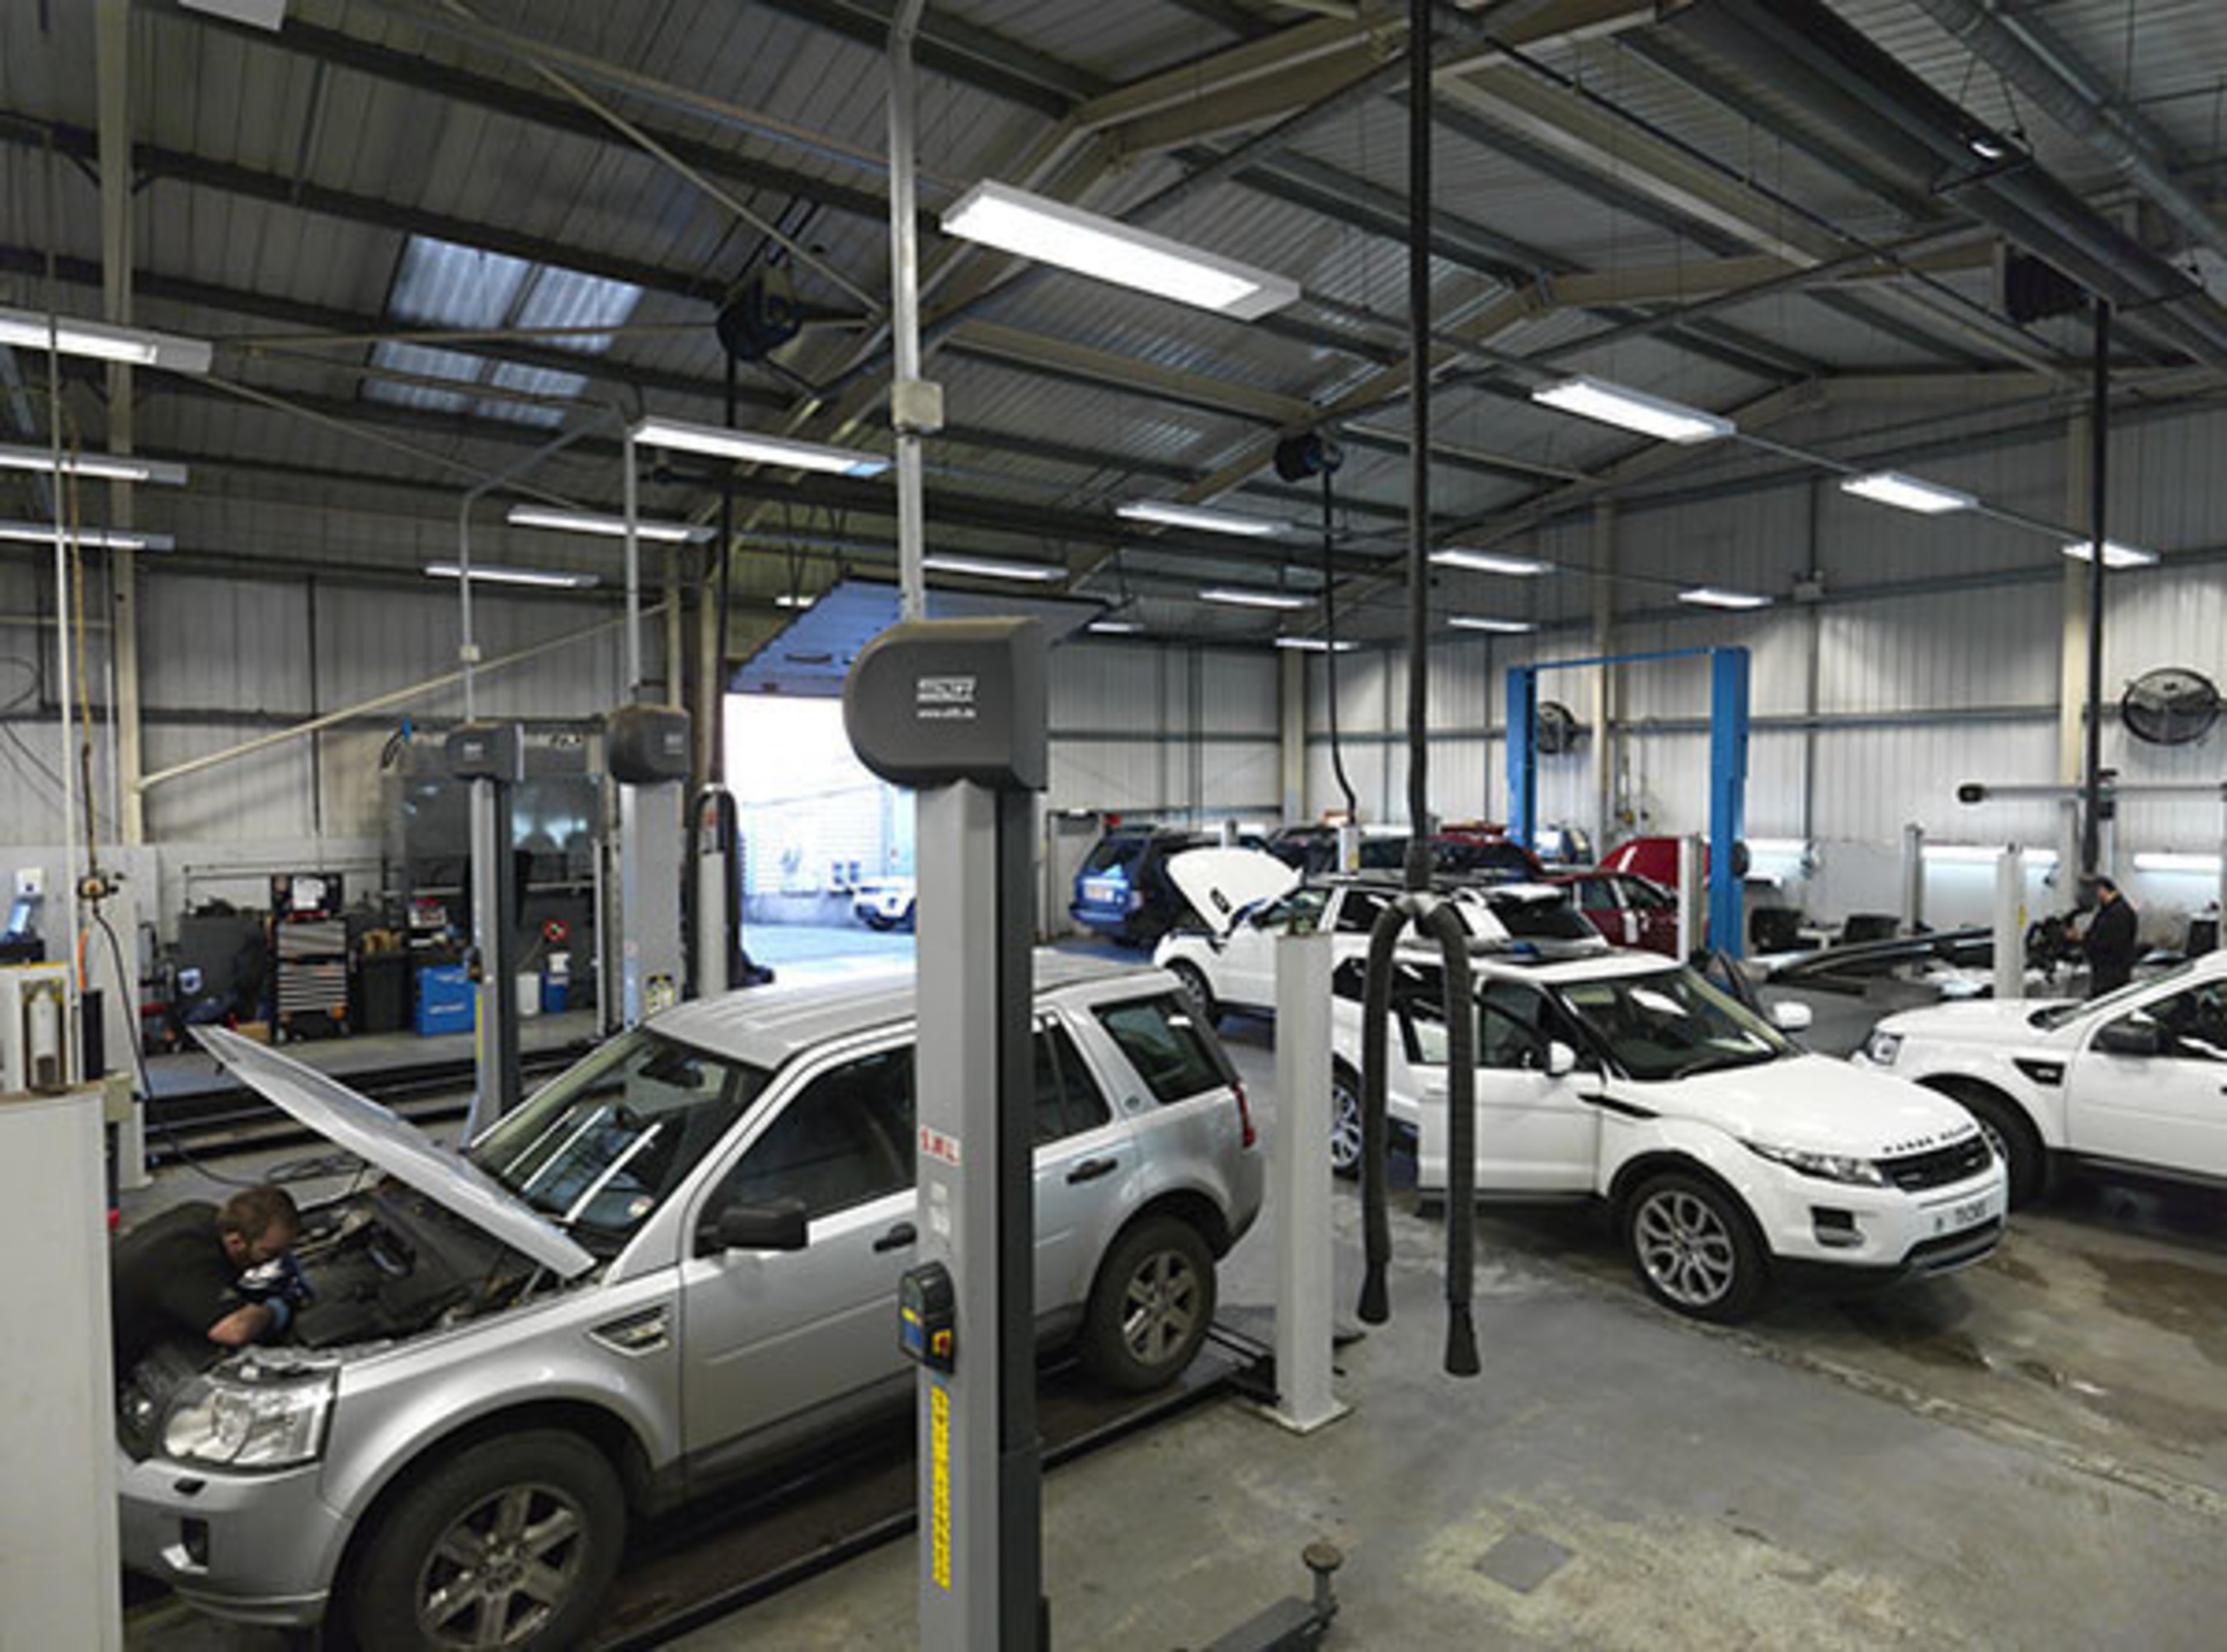 The 73-property Pendragon portfolio acquired by W. P. Carey Inc. includes vehicle showrooms and onsite auto body shops throughout the UK.